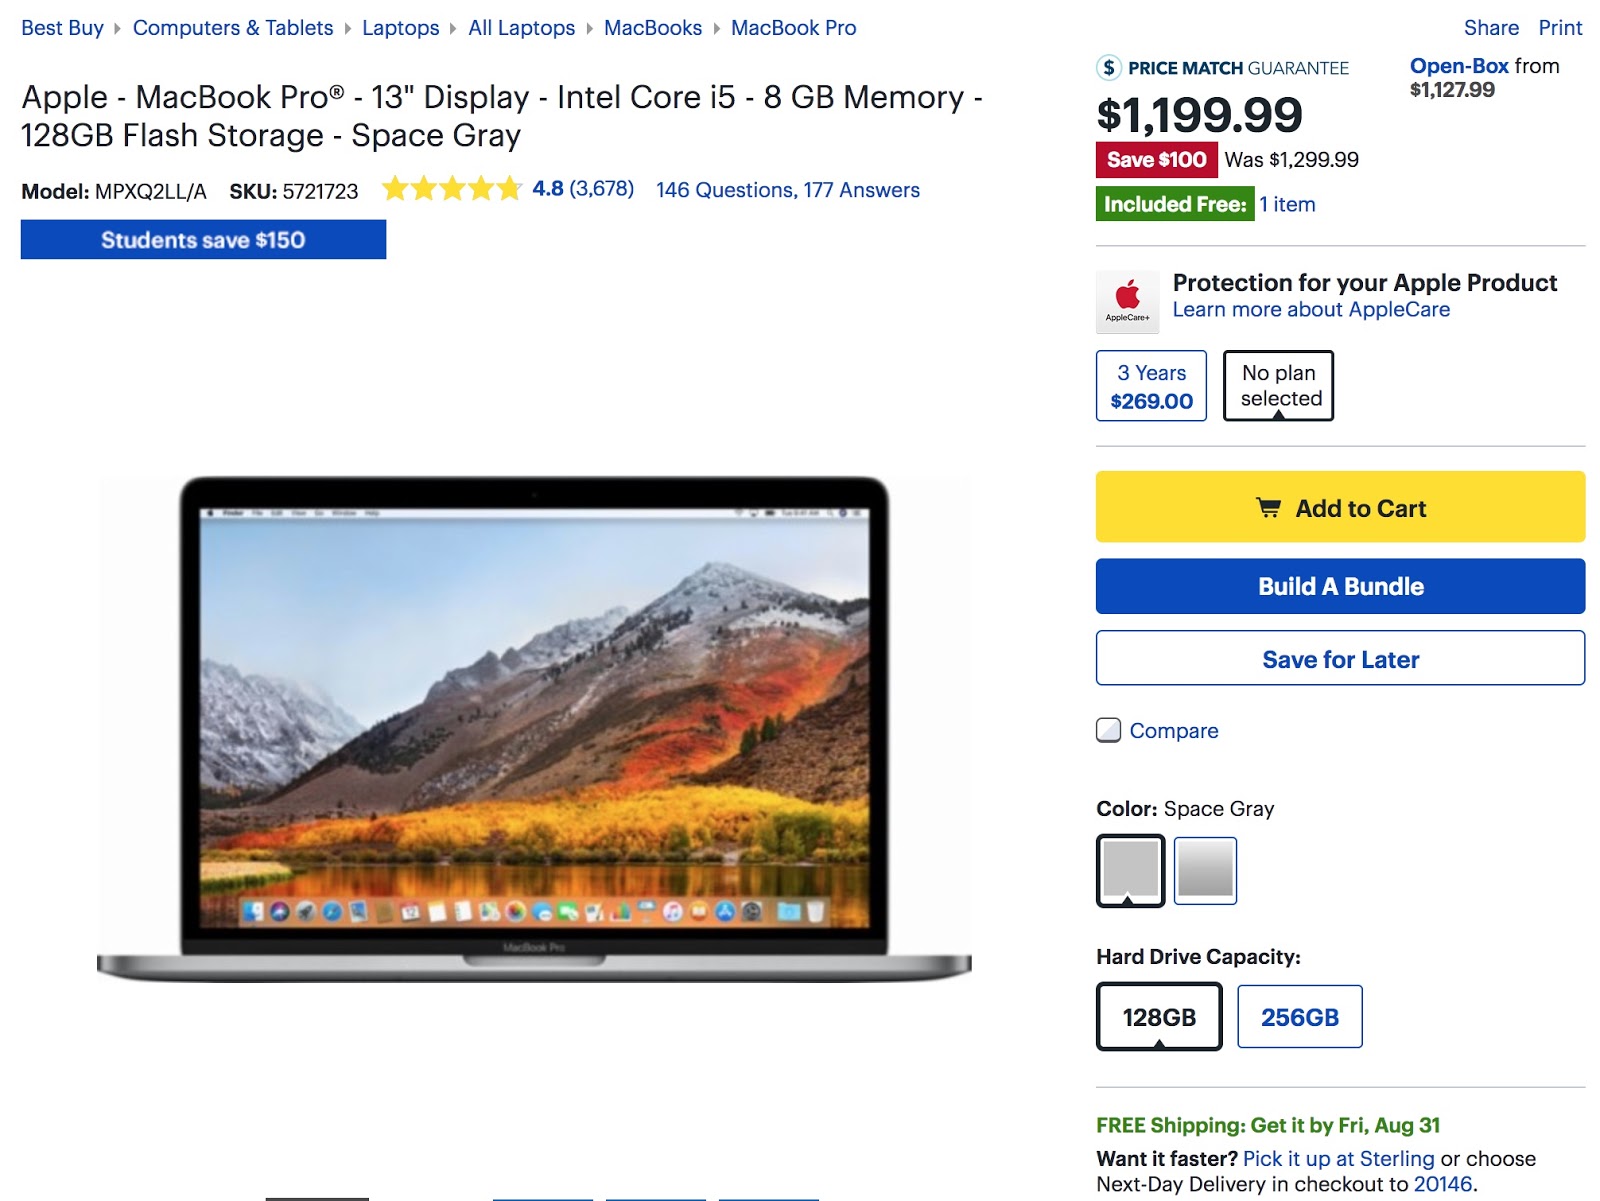 Screenshot showing a product page on Best Buy